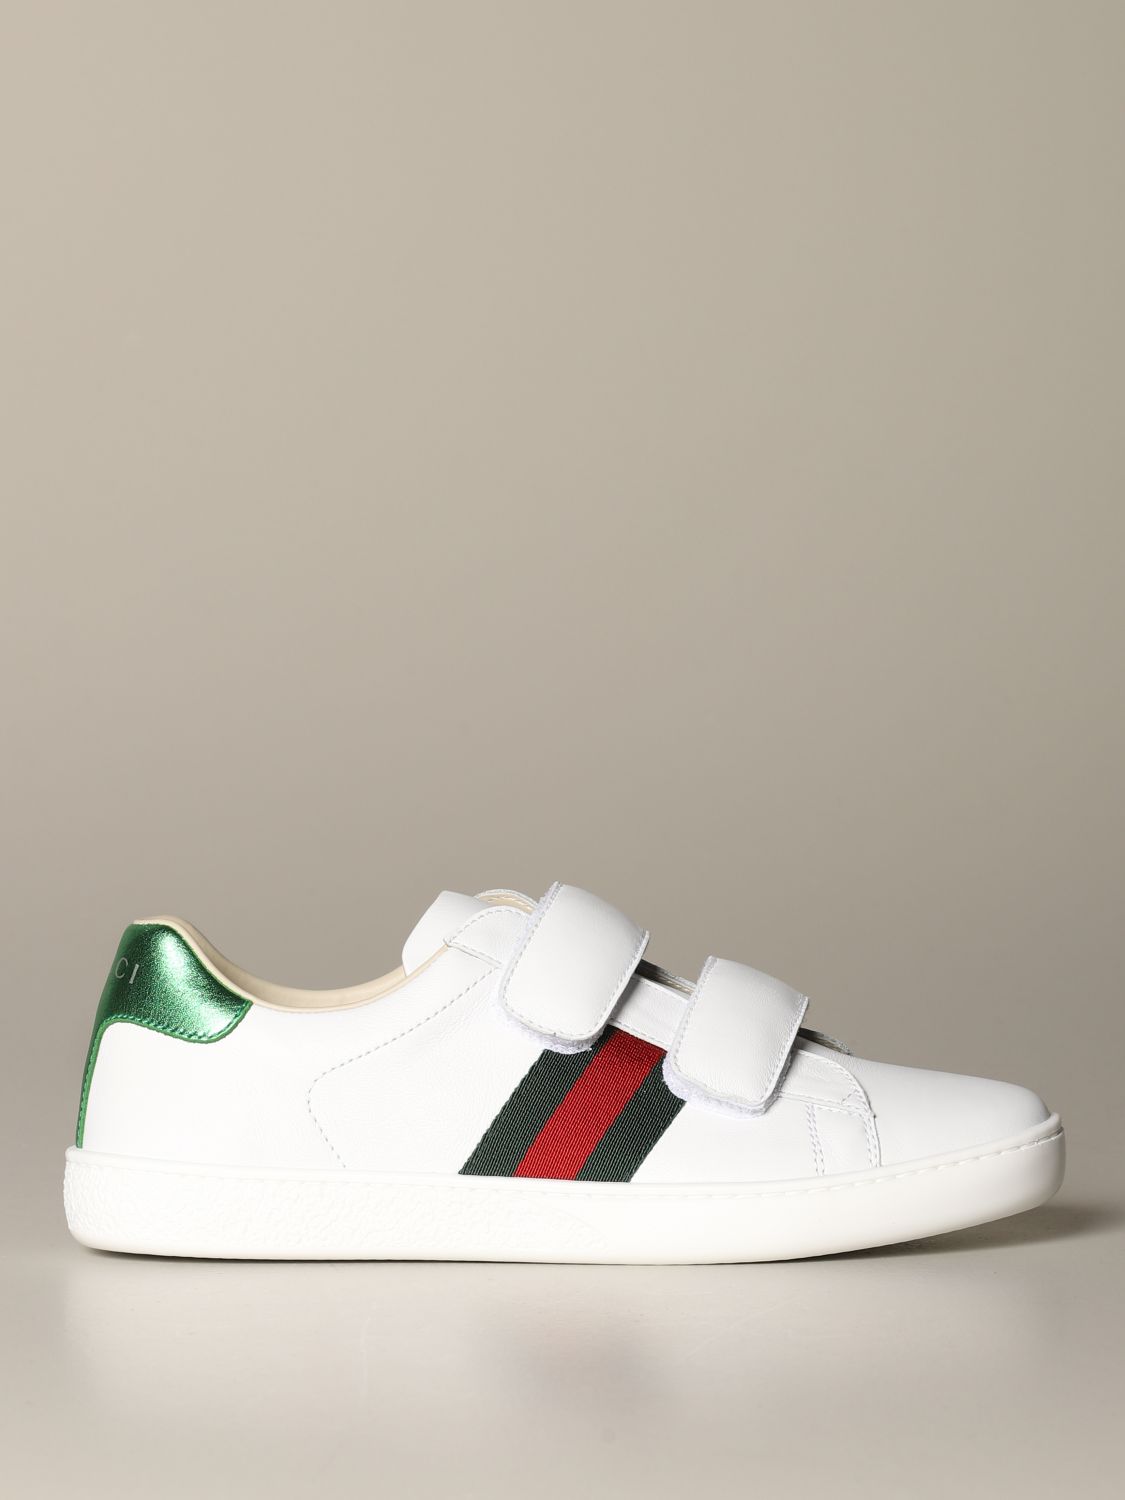 gucci ace rainbow sneakers